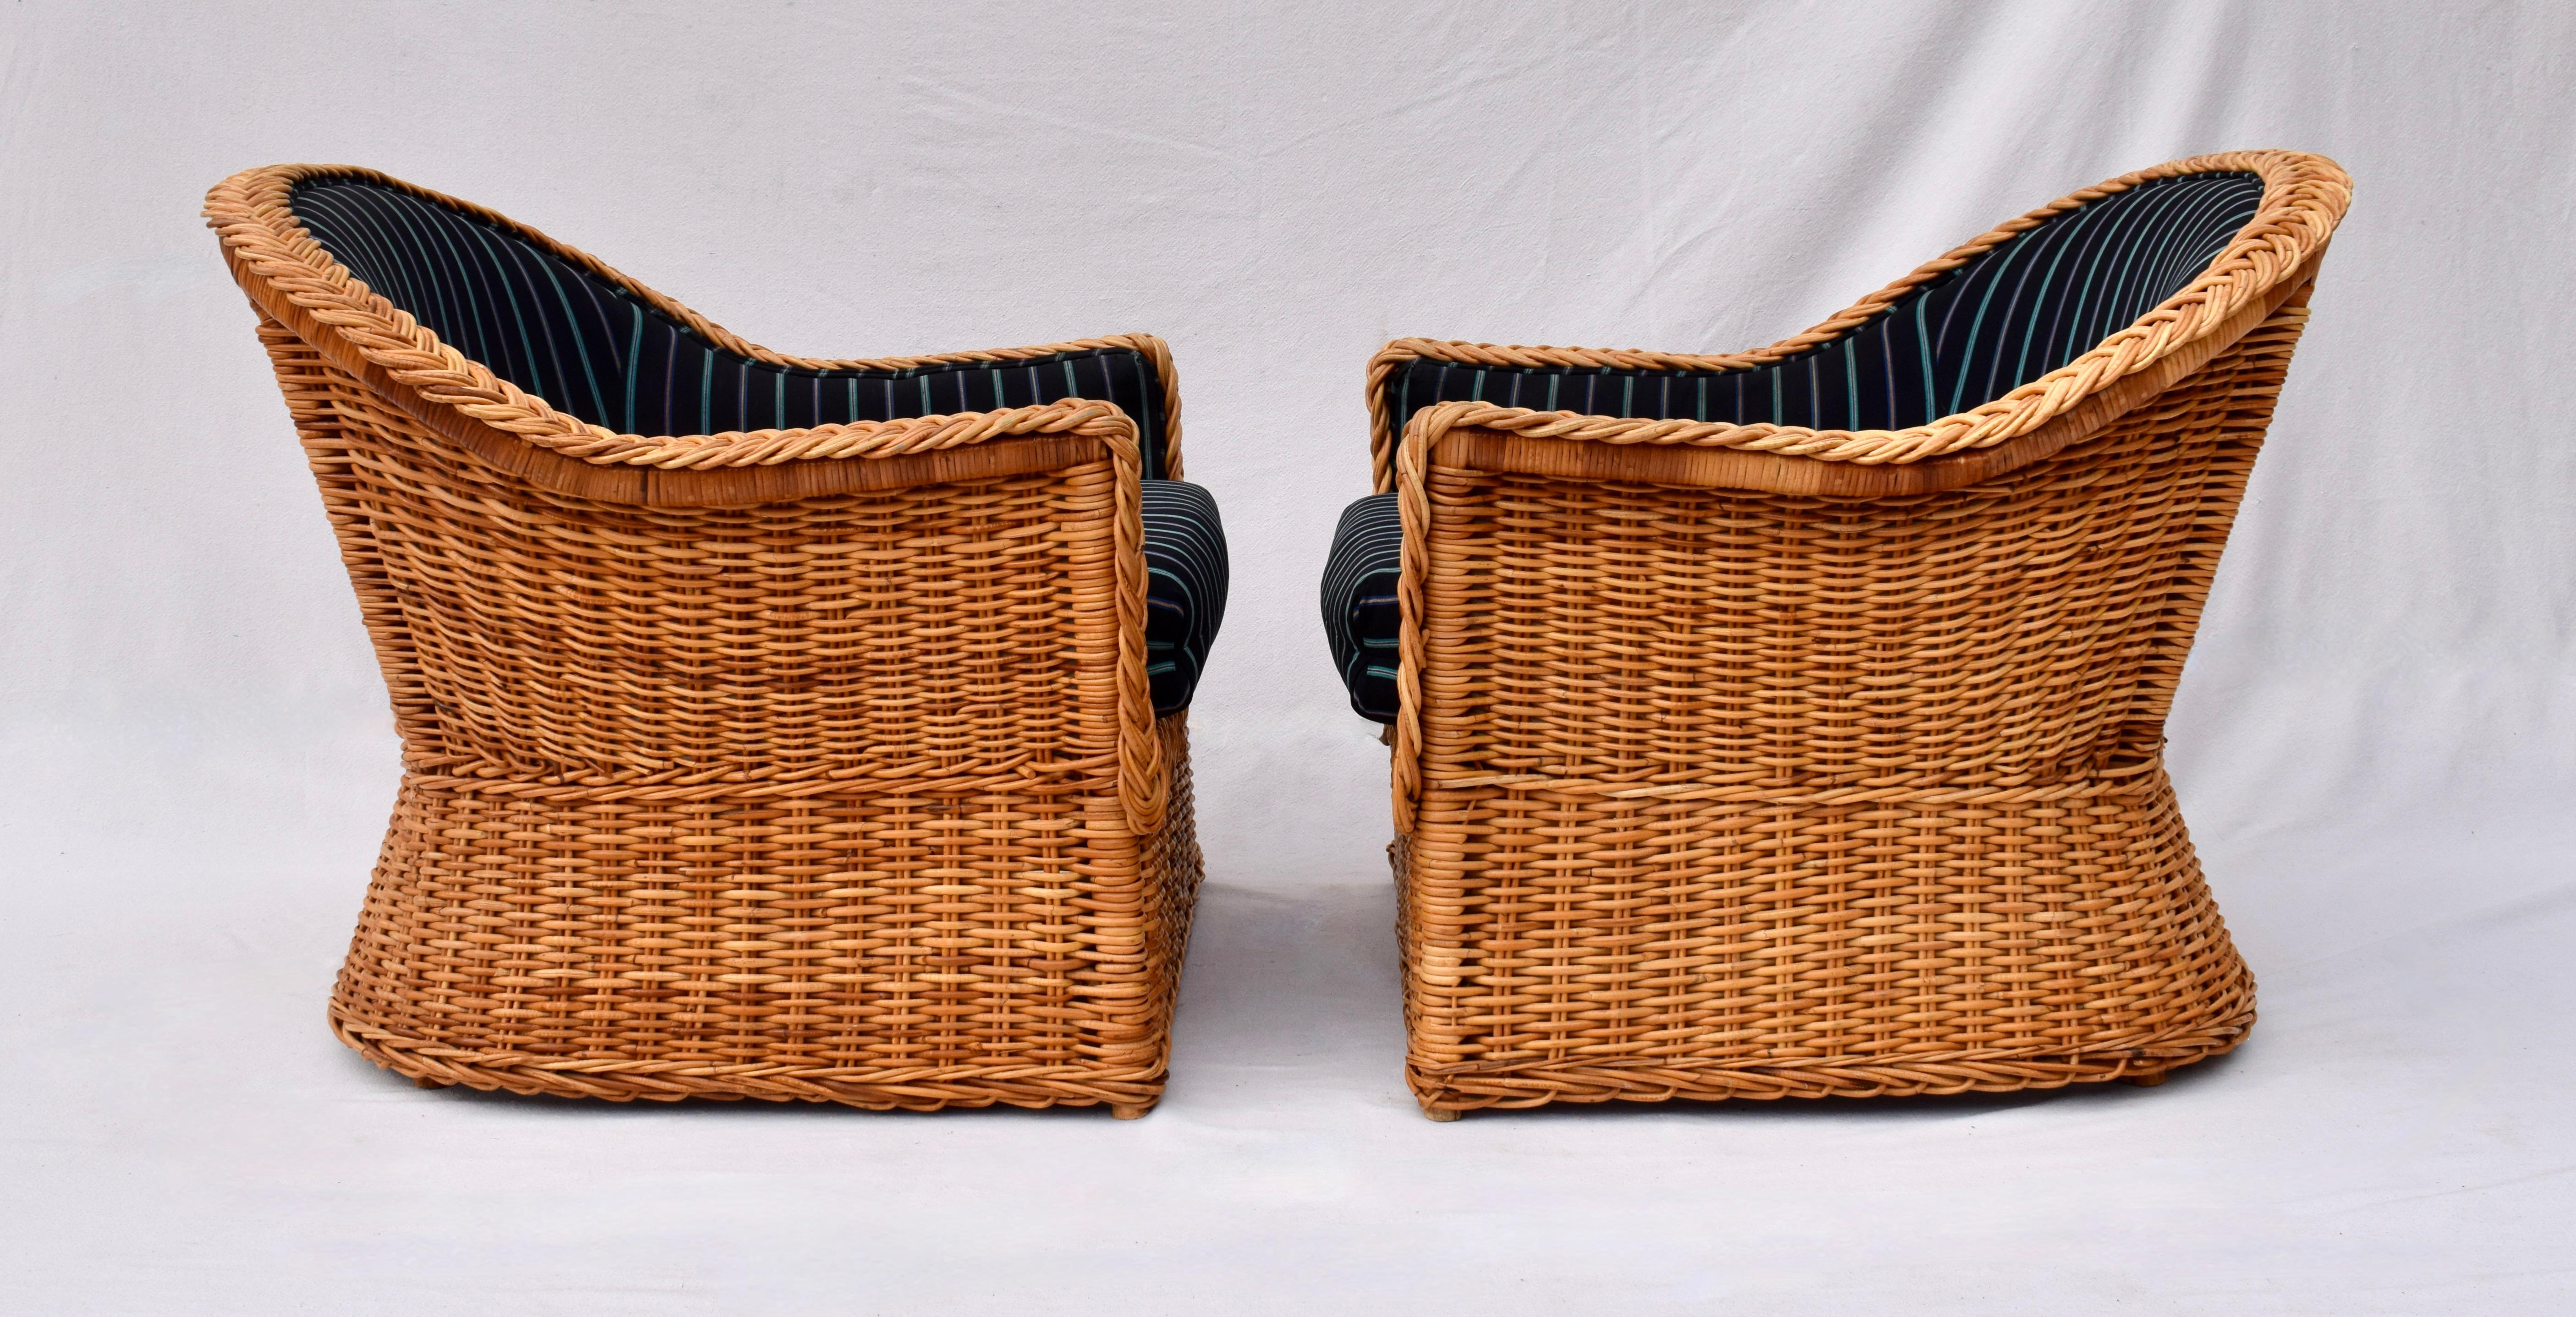 Upholstery 1980's Wicker Works Braided Rattan Club Chairs, Pair For Sale